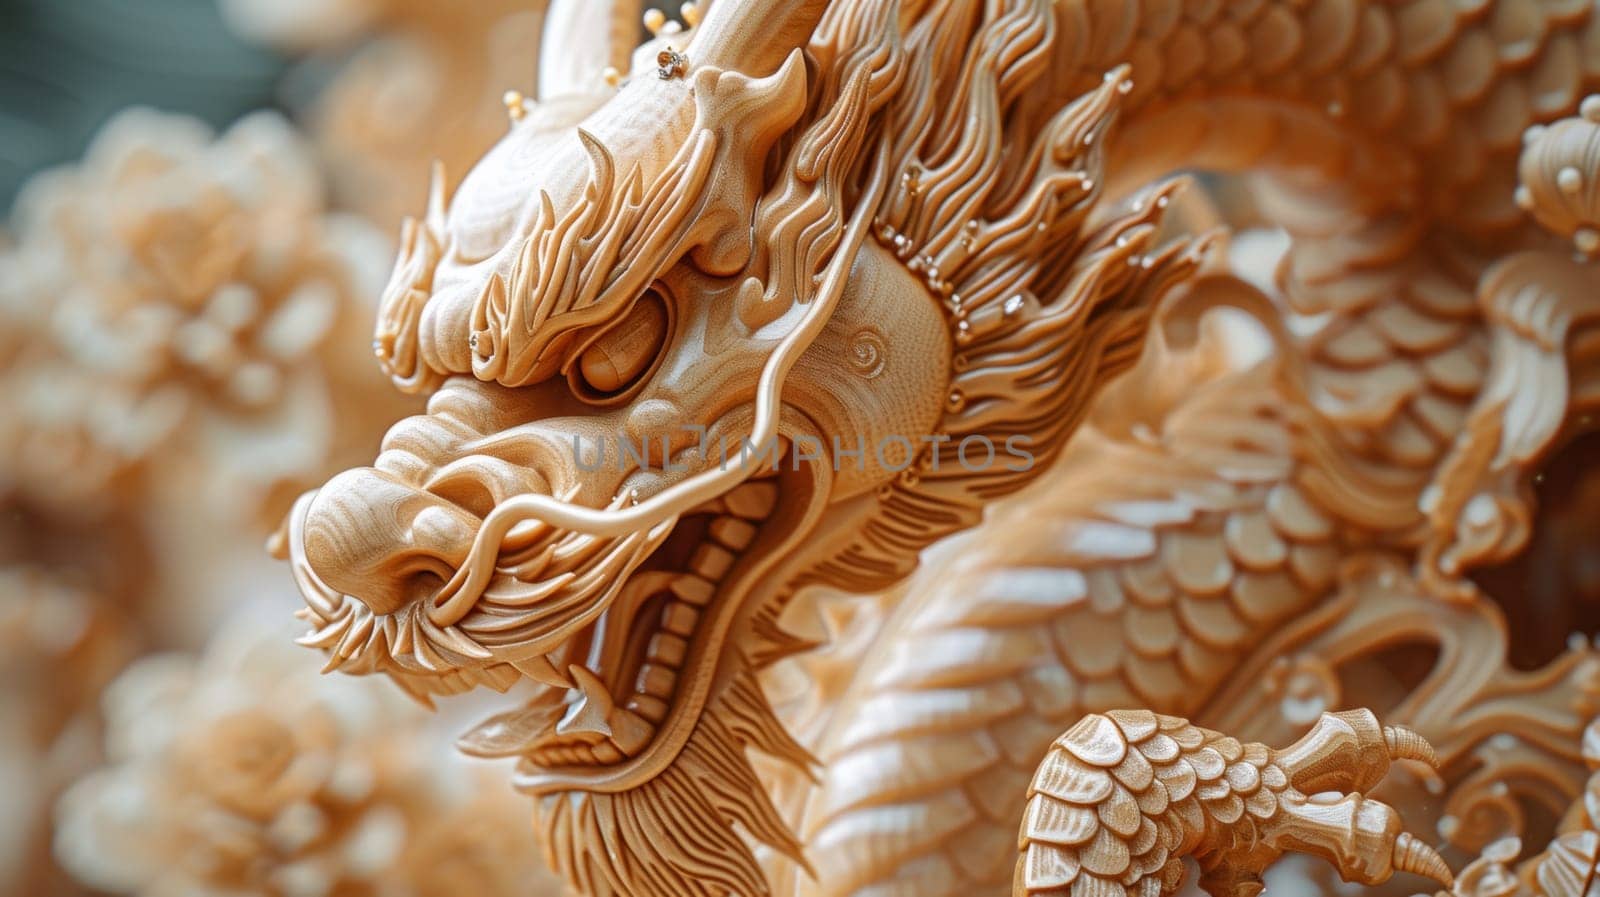 A close up of a carved dragon head on display in an art gallery, AI by starush